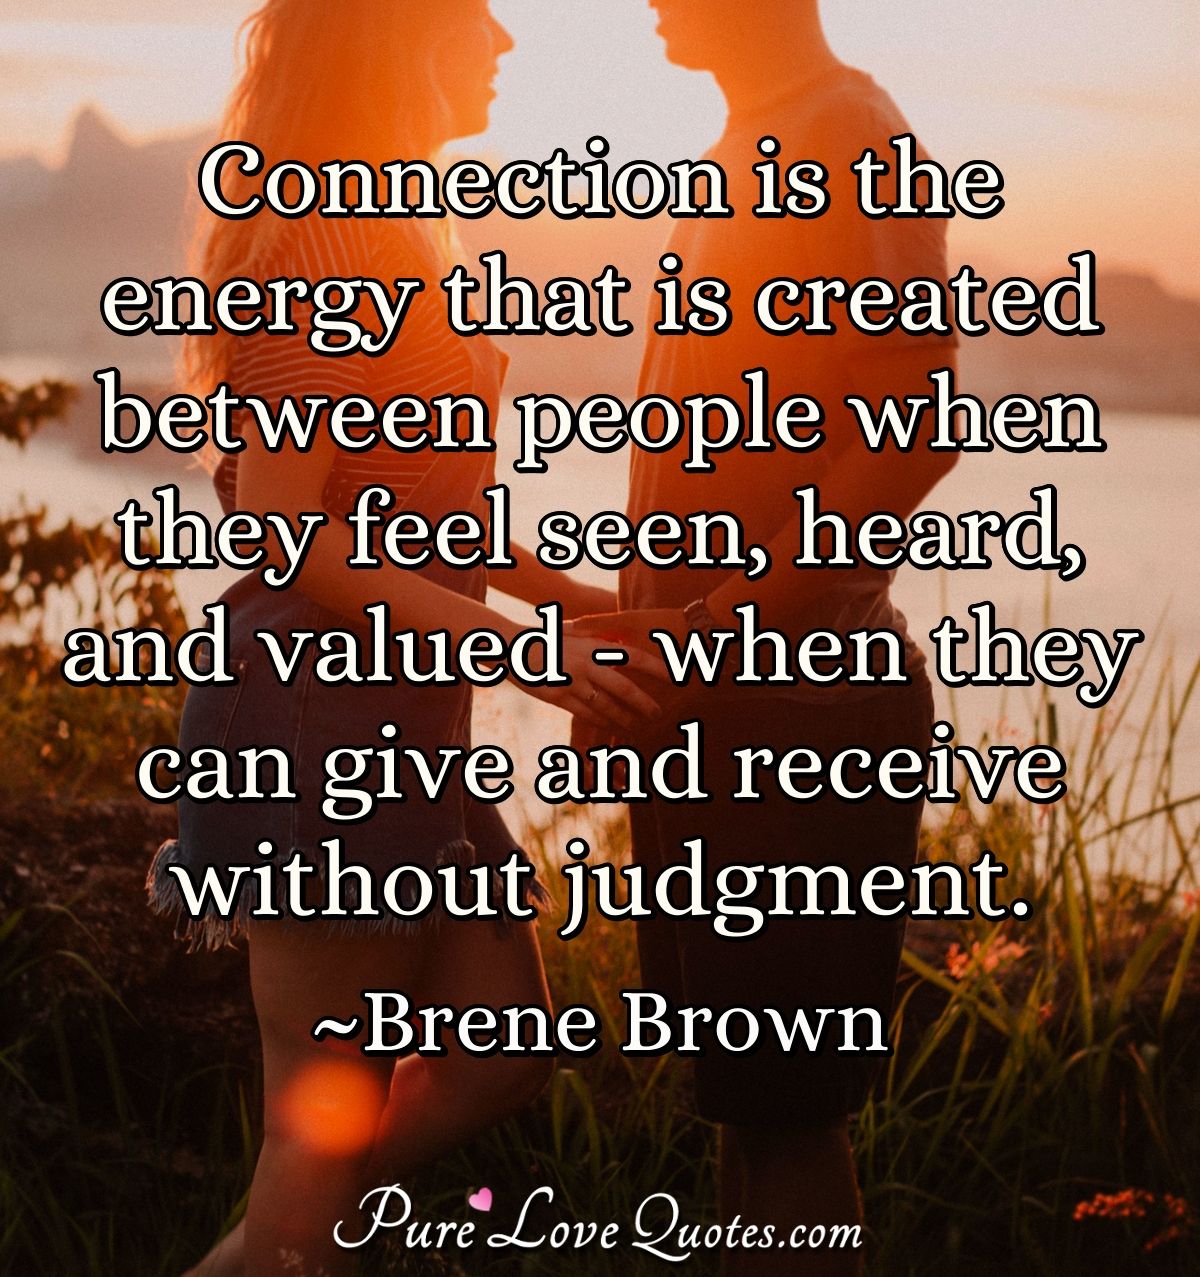 Connection is the energy that is created between people when they feel seen, heard, and valued - when they can give and receive without judgment. - Brene Brown